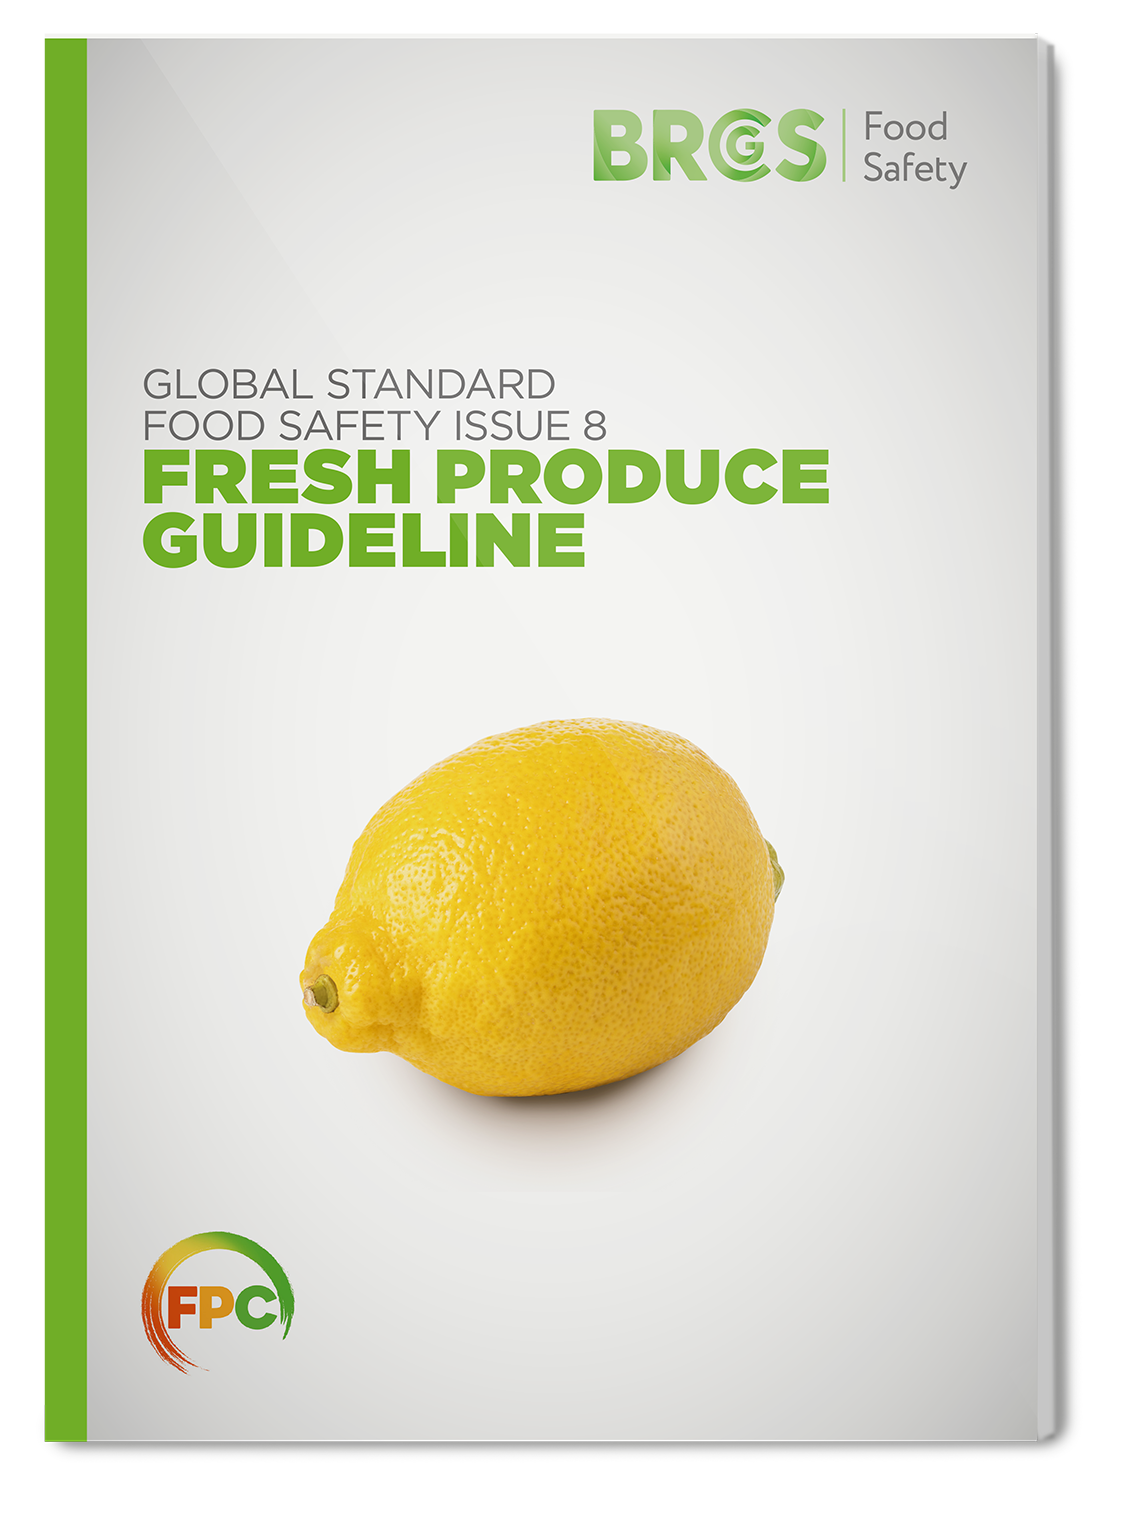 Guideline for Category 5 Fresh Produce